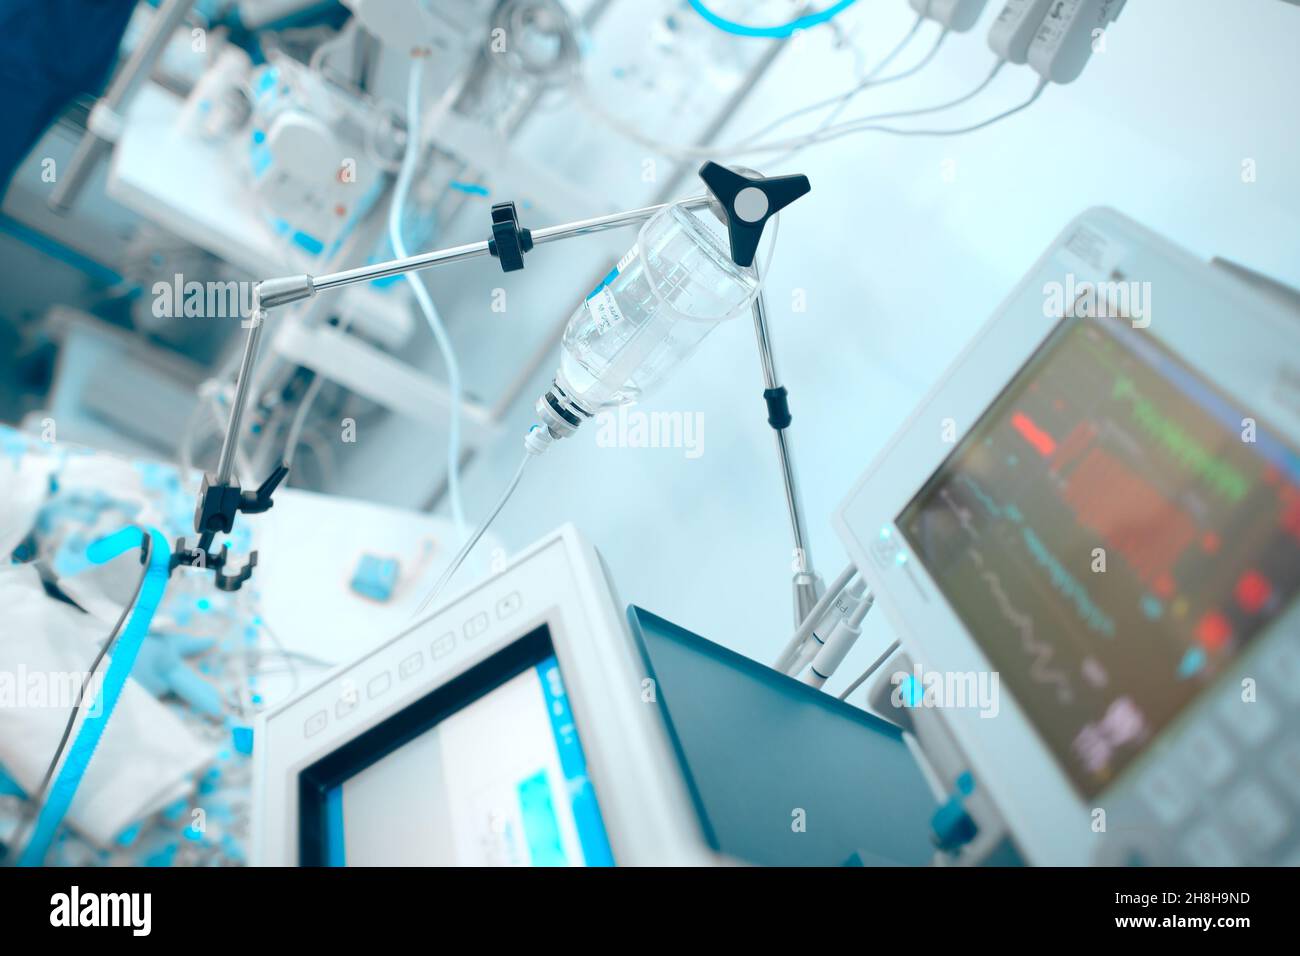 Life support devices connected to the critical condition patient in the ICU. Stock Photo